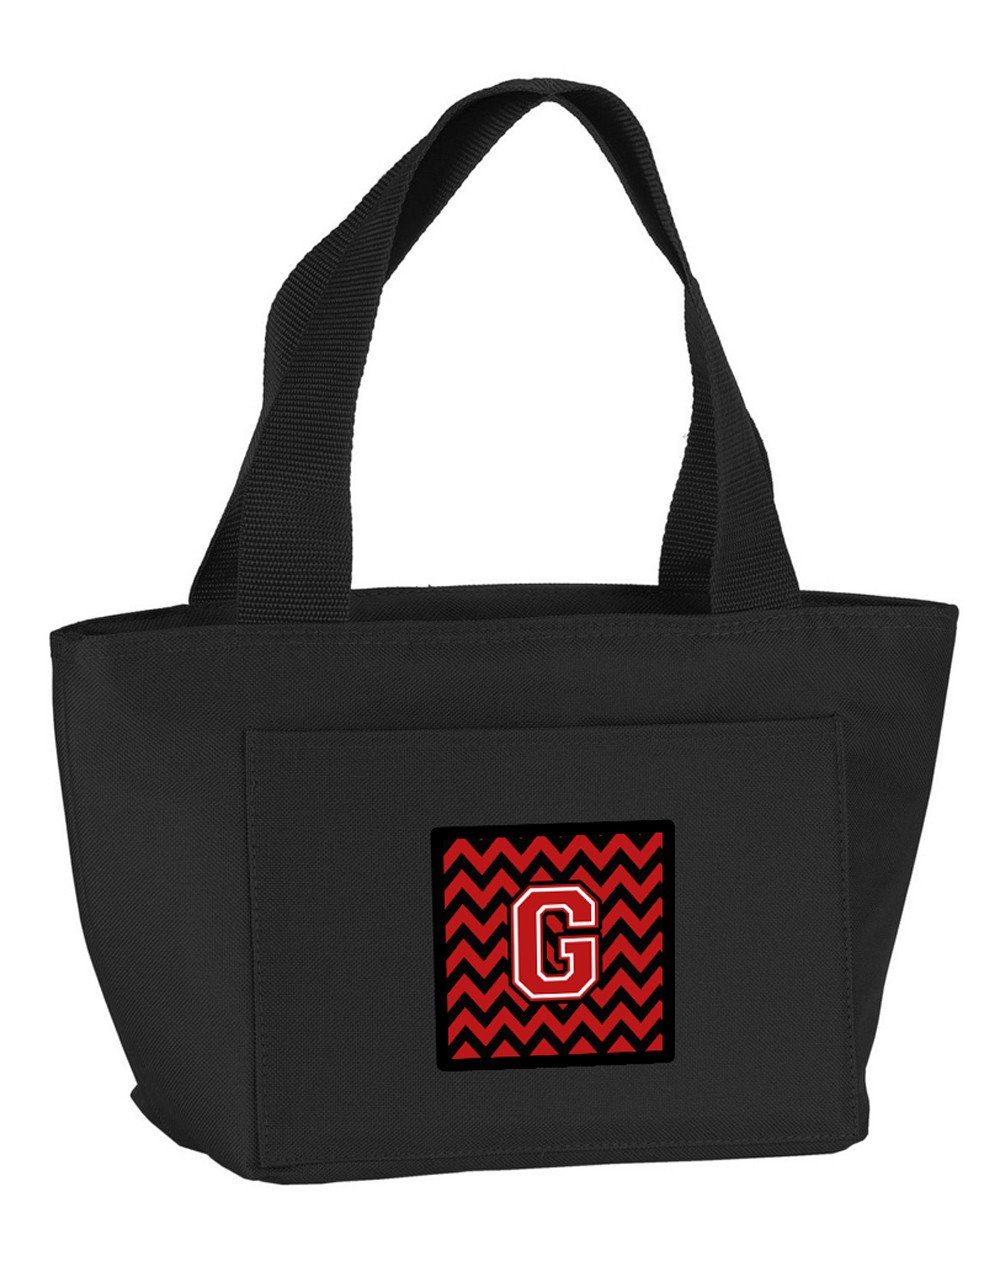 Letter G Chevron Black and Red   Lunch Bag CJ1047-GBK-8808 by Caroline's Treasures